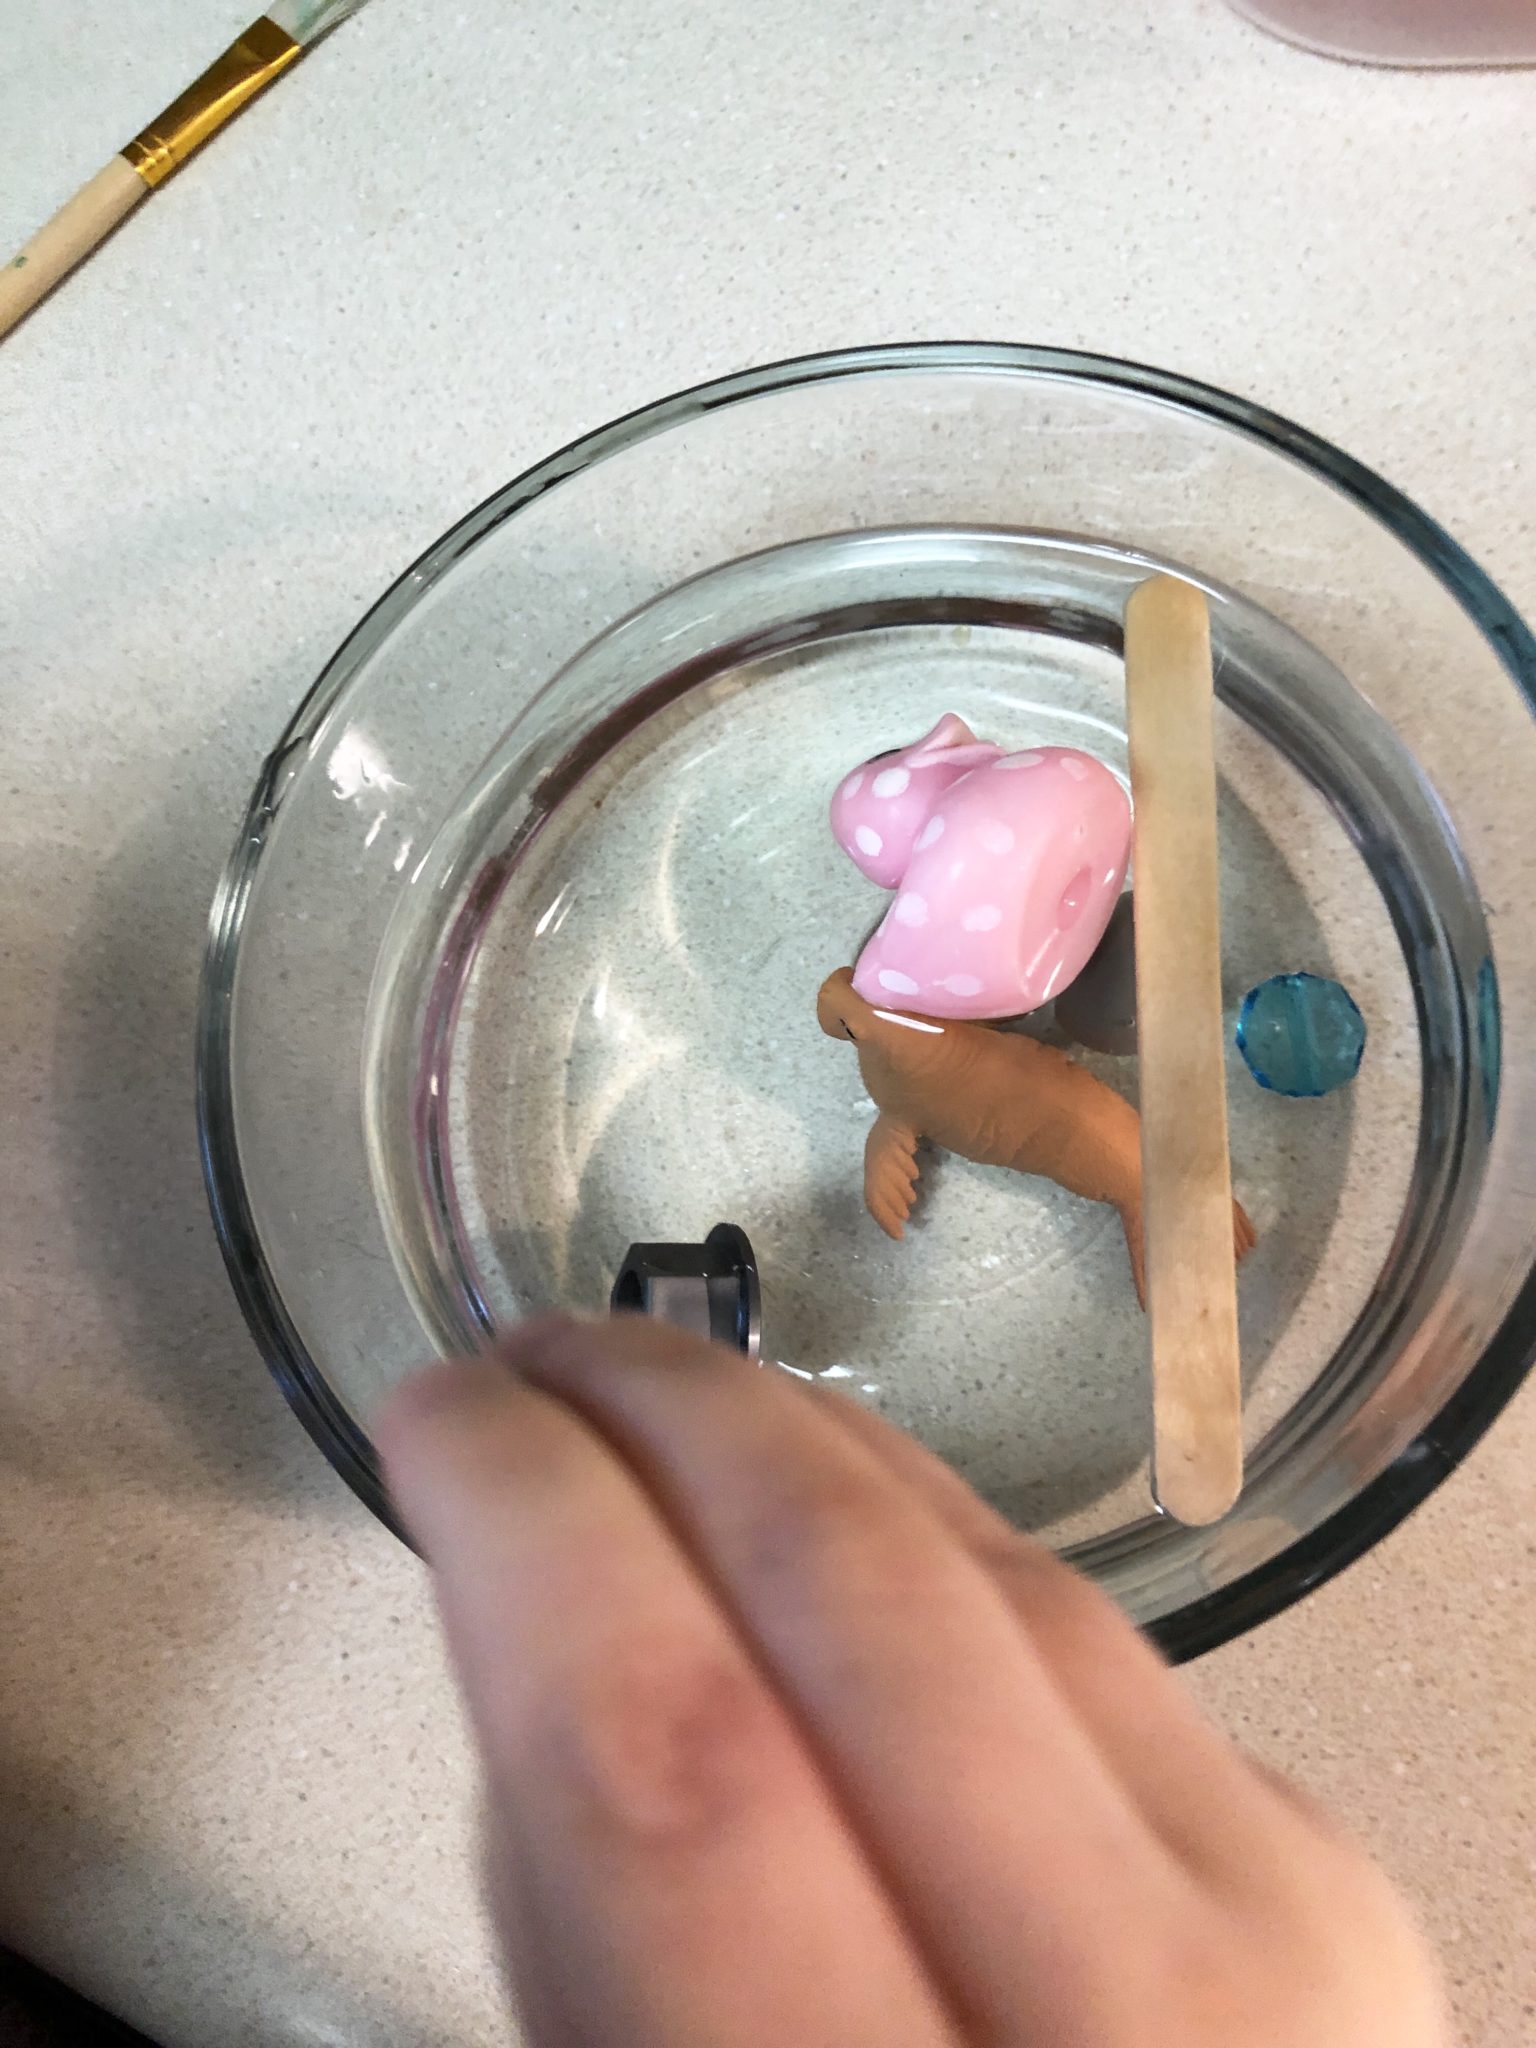 Rosebud adding objects to the bowl.